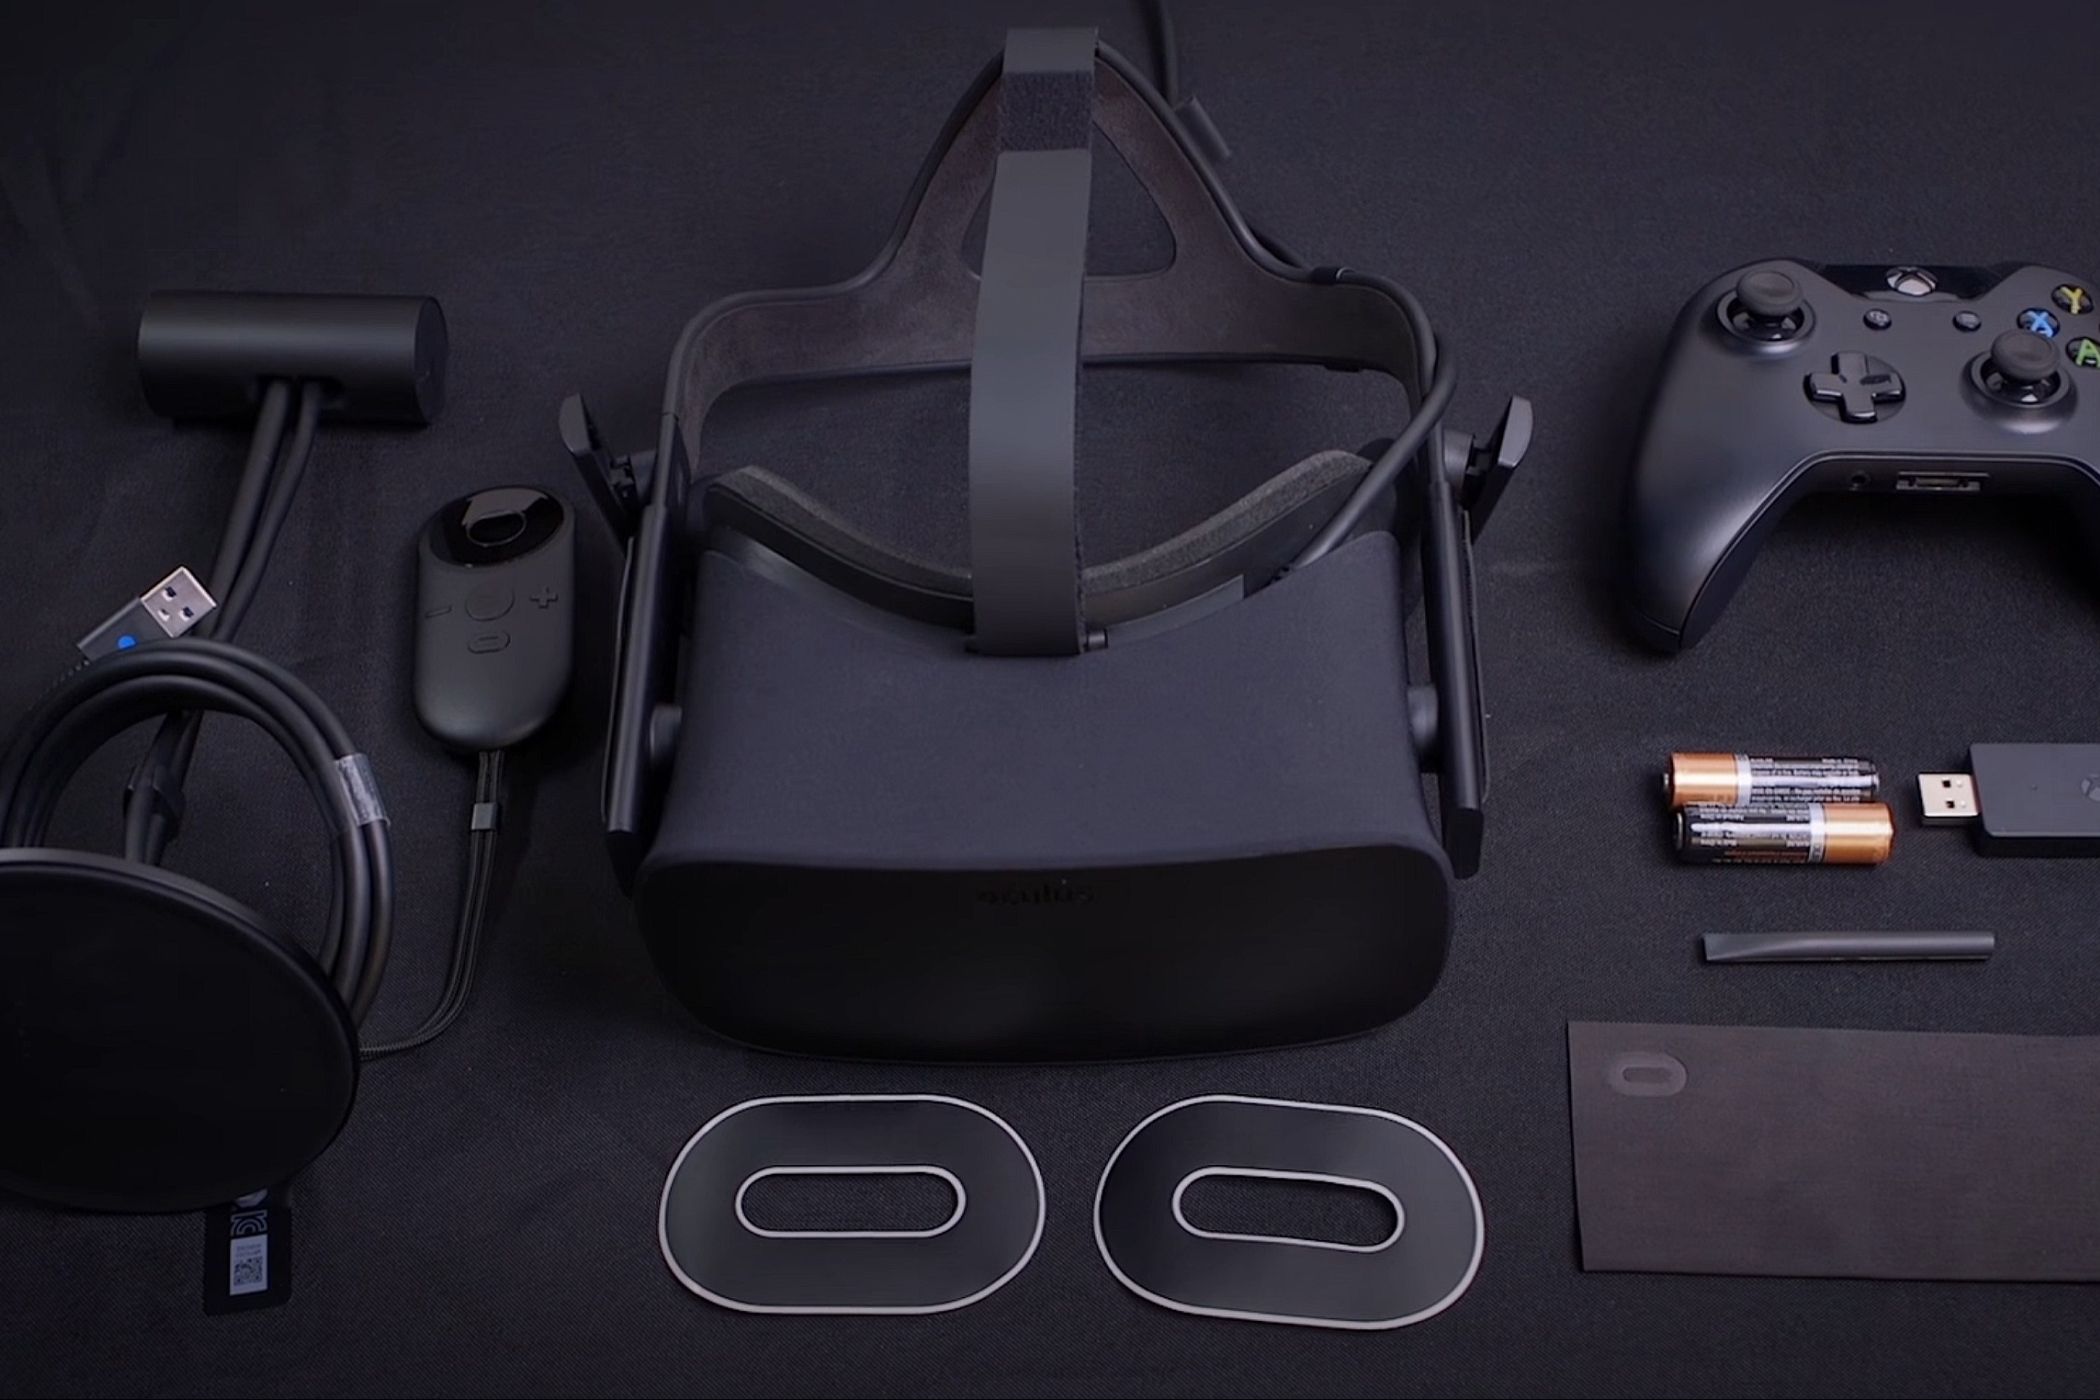 On this day 8 years ago, Oculus Rift CV1 was released